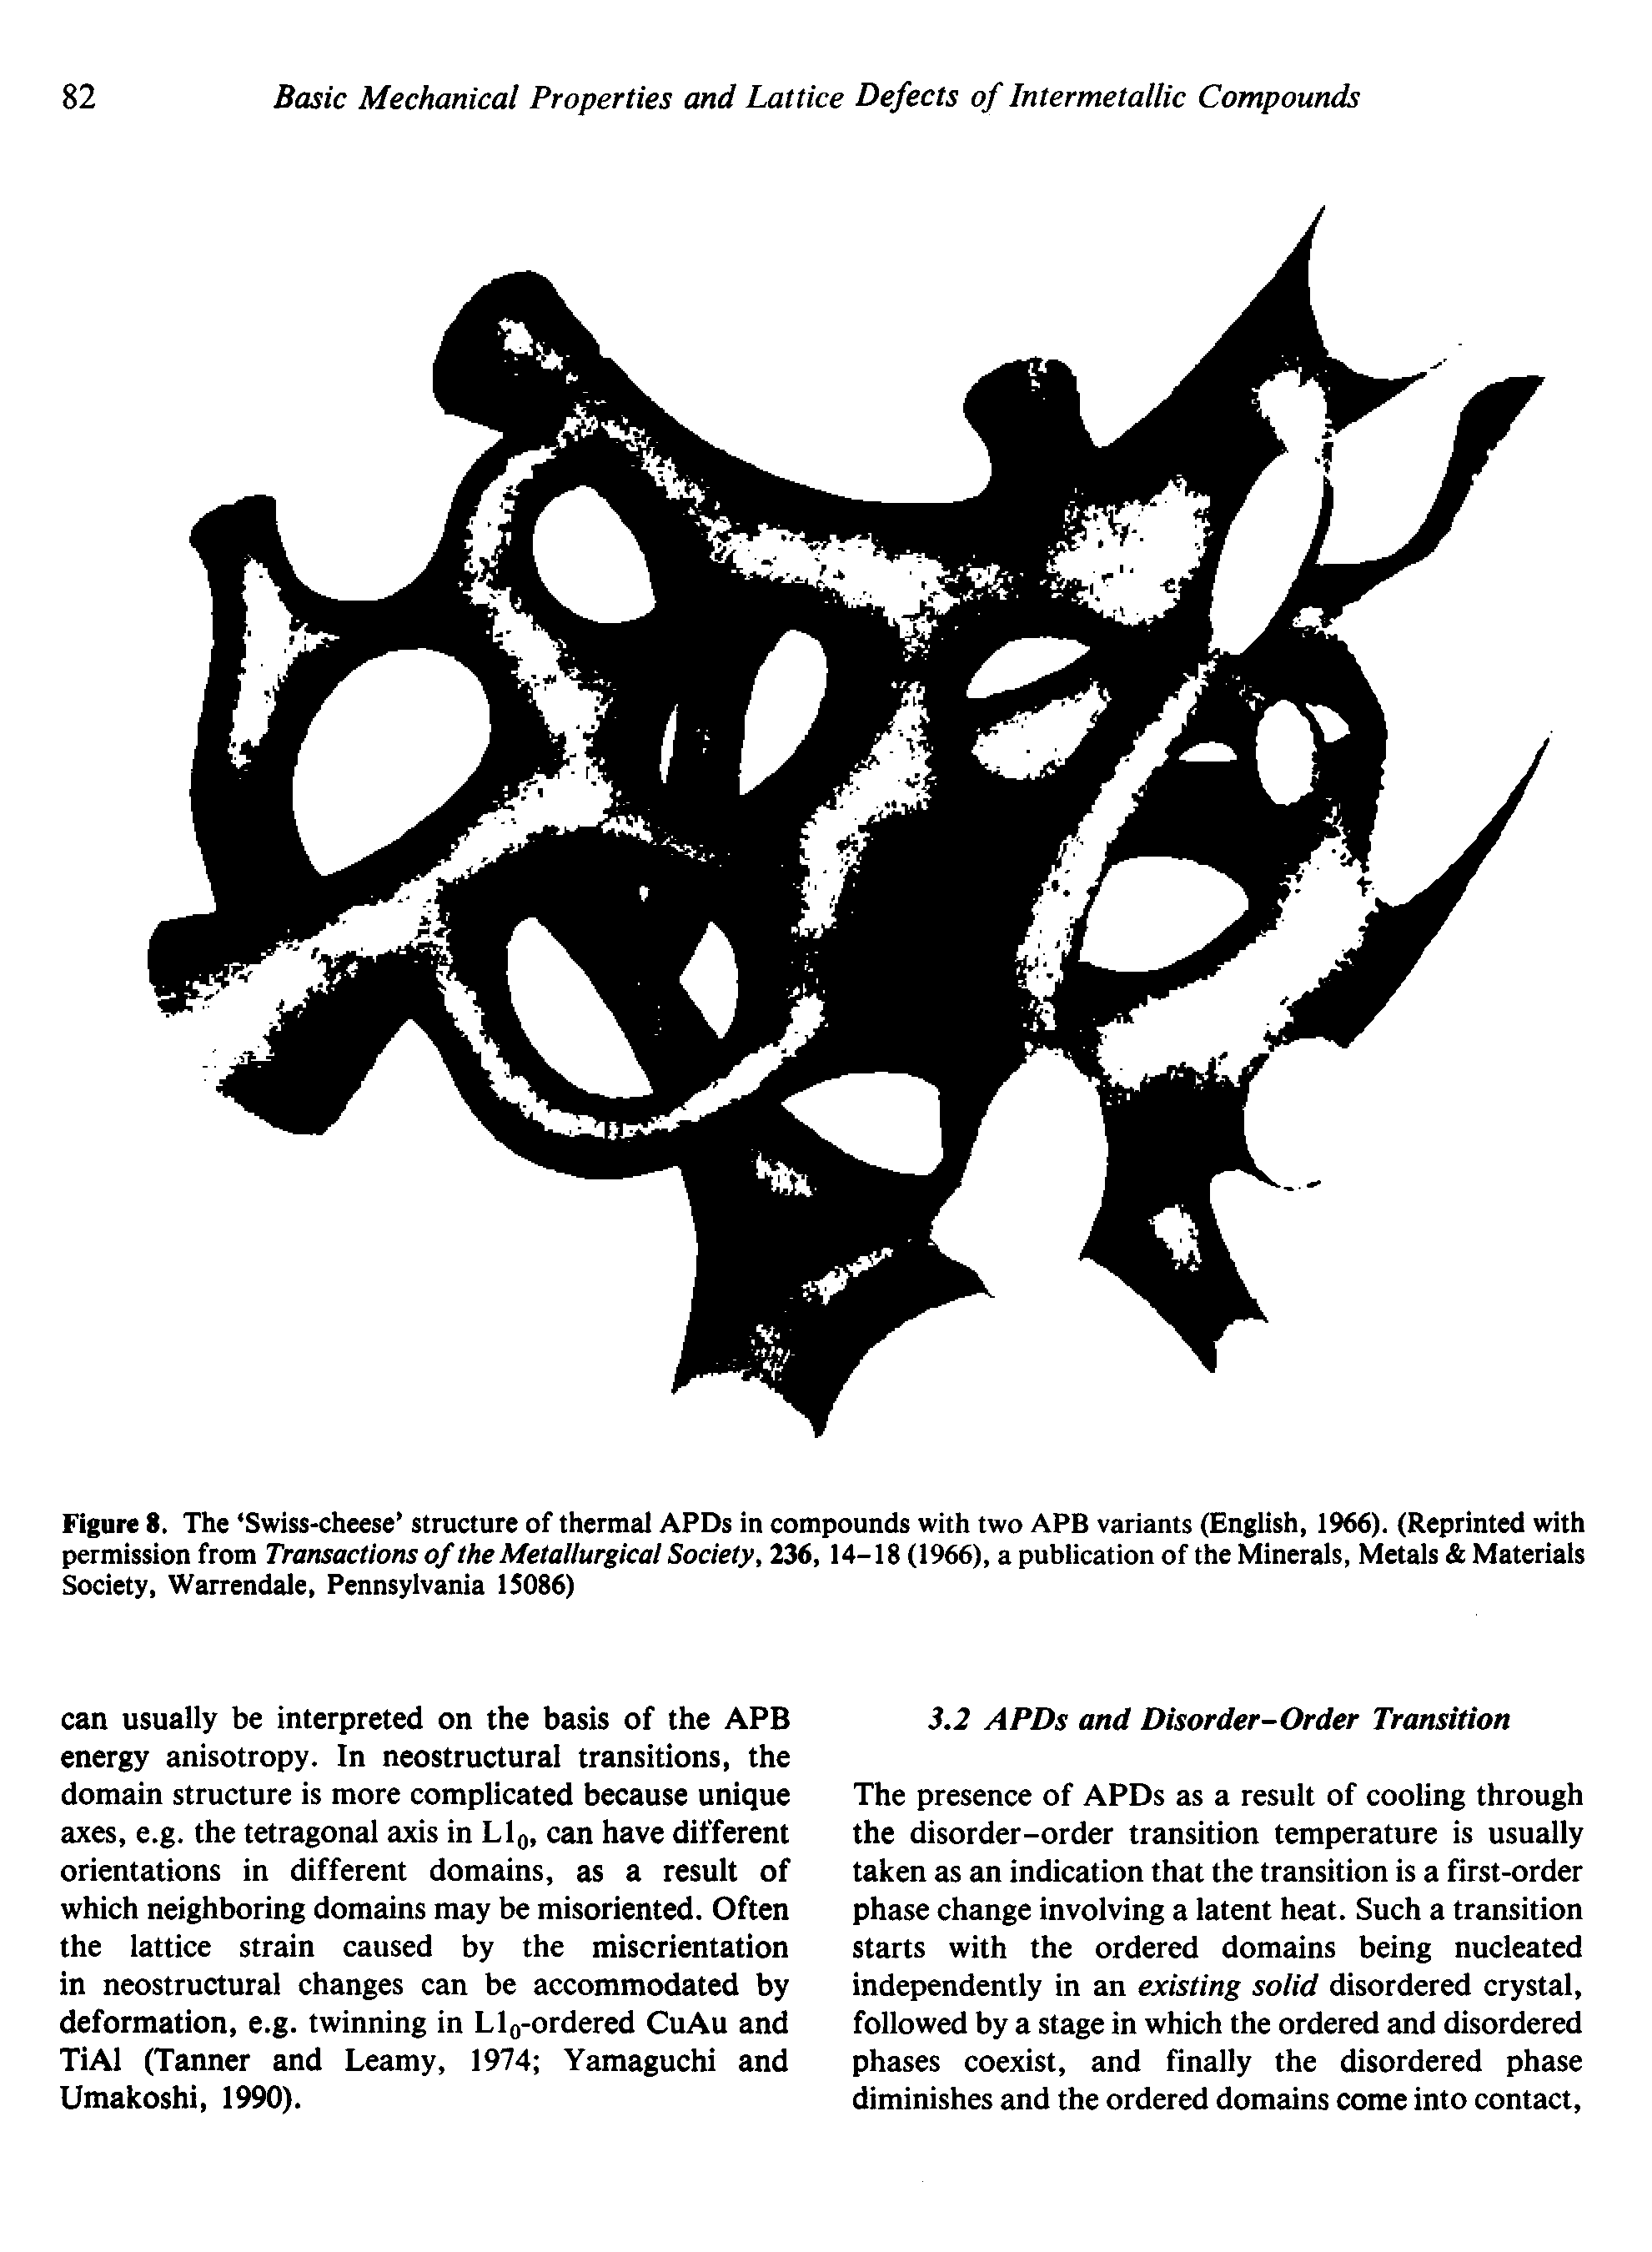 Figure 8. The Swiss-cheese structure of thermal APDs in compounds with two APB variants (Engiish, 1966). (Reprinted with permission from Transactions of the Metallurgical Society, 236,14-18 (1966), a publication of the Minerals, Metals Materials Society, Warrendale, Pennsylvania 15086)...